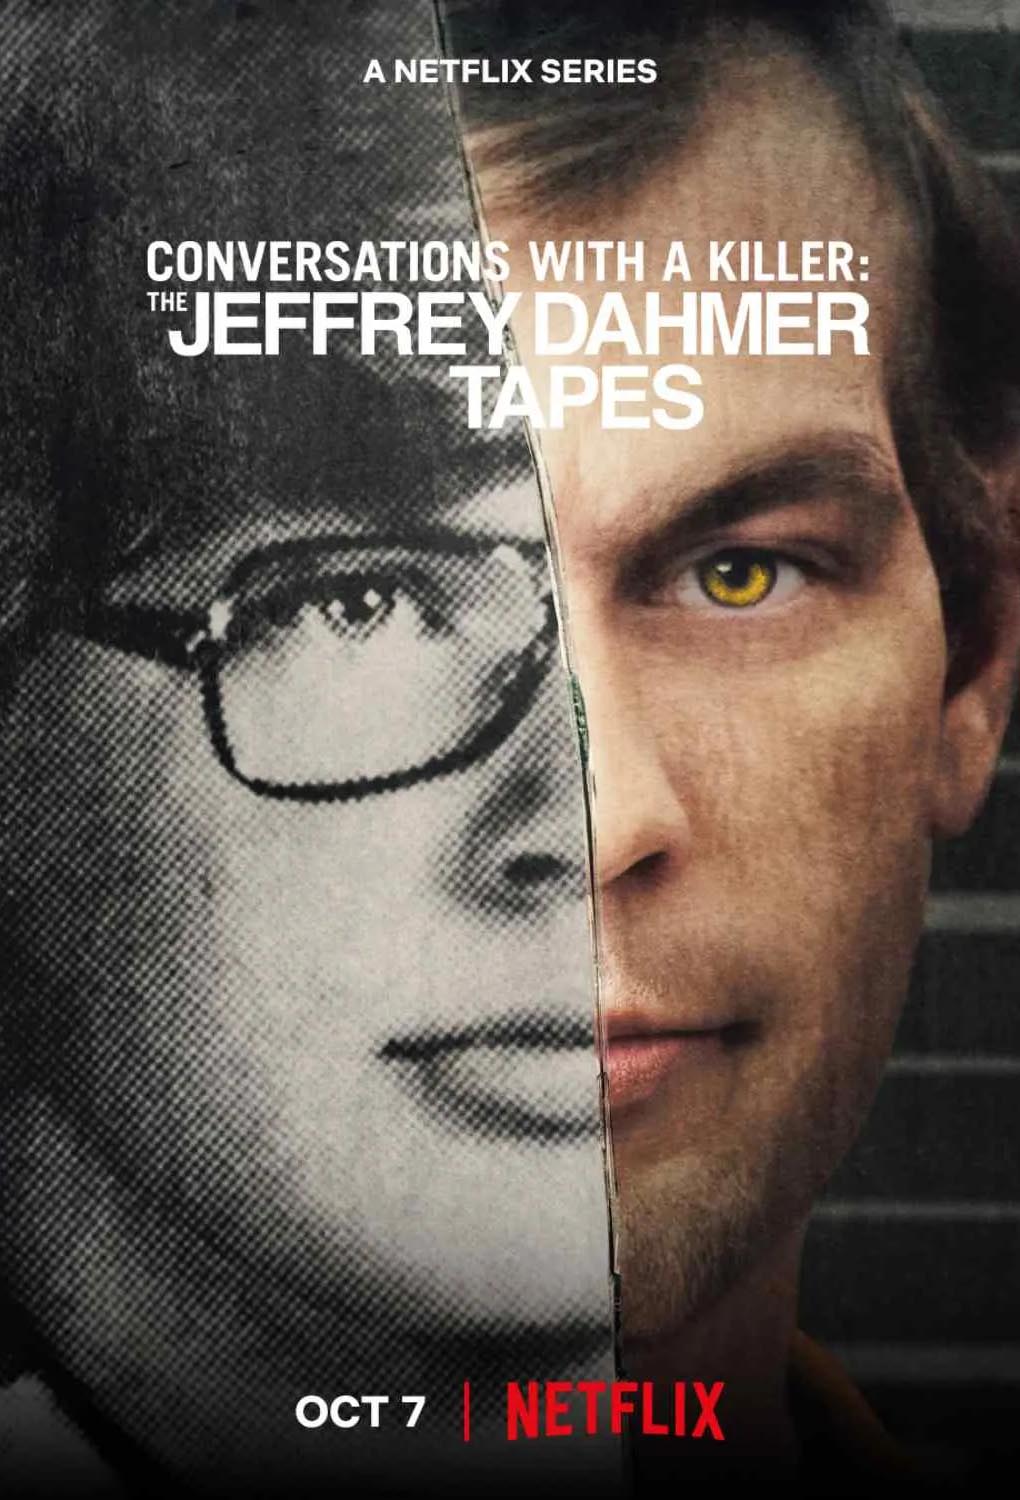 Conversations with a Killer: The Jeffrey Dahmer Tapes Season 1 Episode 2